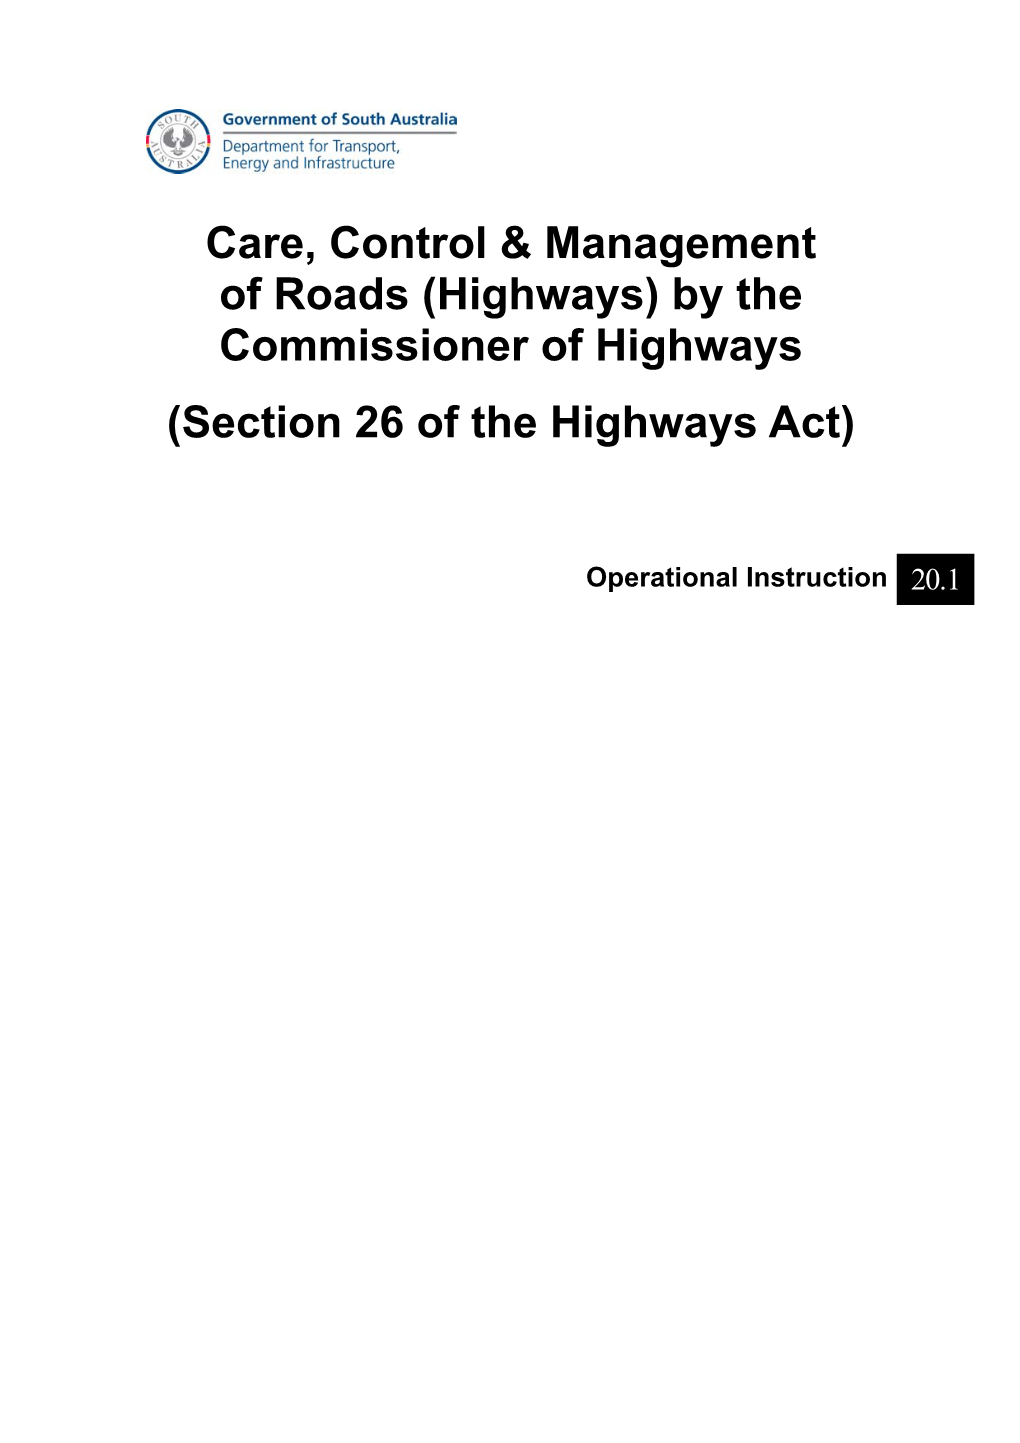 Care, Control and Maintenance of Roads by the Commissioner Of